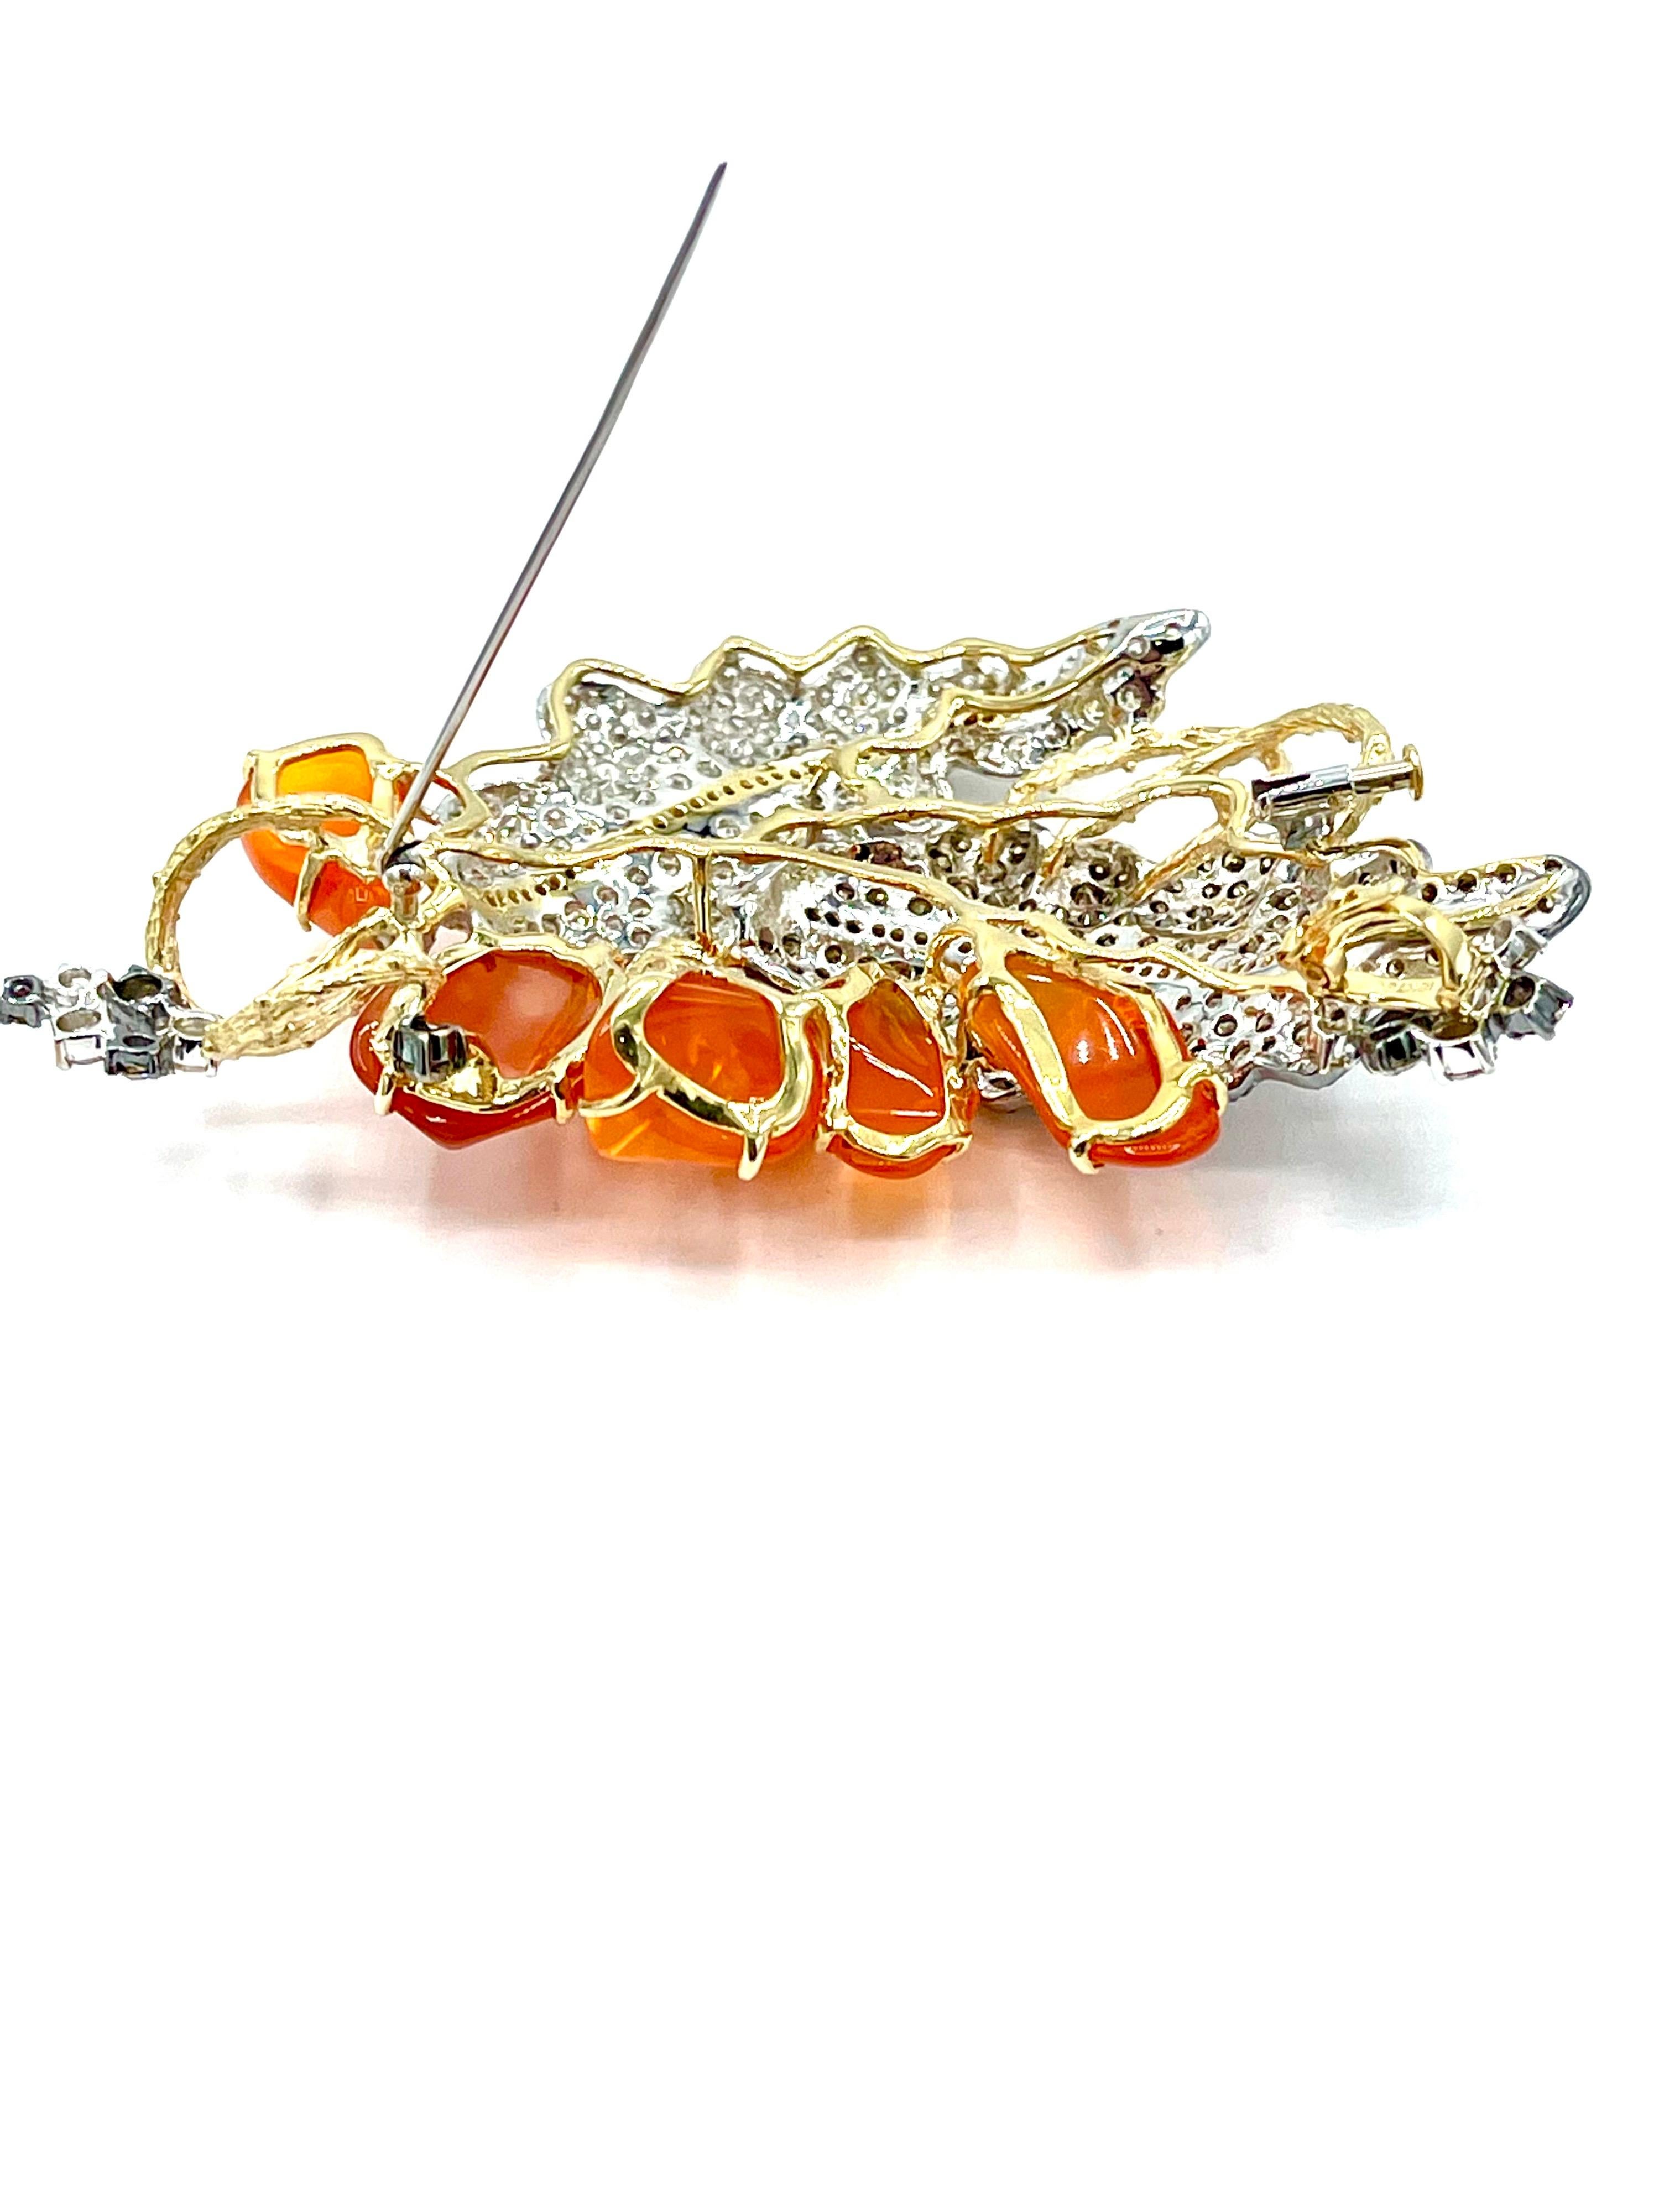 8.20 Carat Pave Diamond and Fire Opal 18 Karat Leaves Pendant Brooch In Excellent Condition For Sale In Chevy Chase, MD